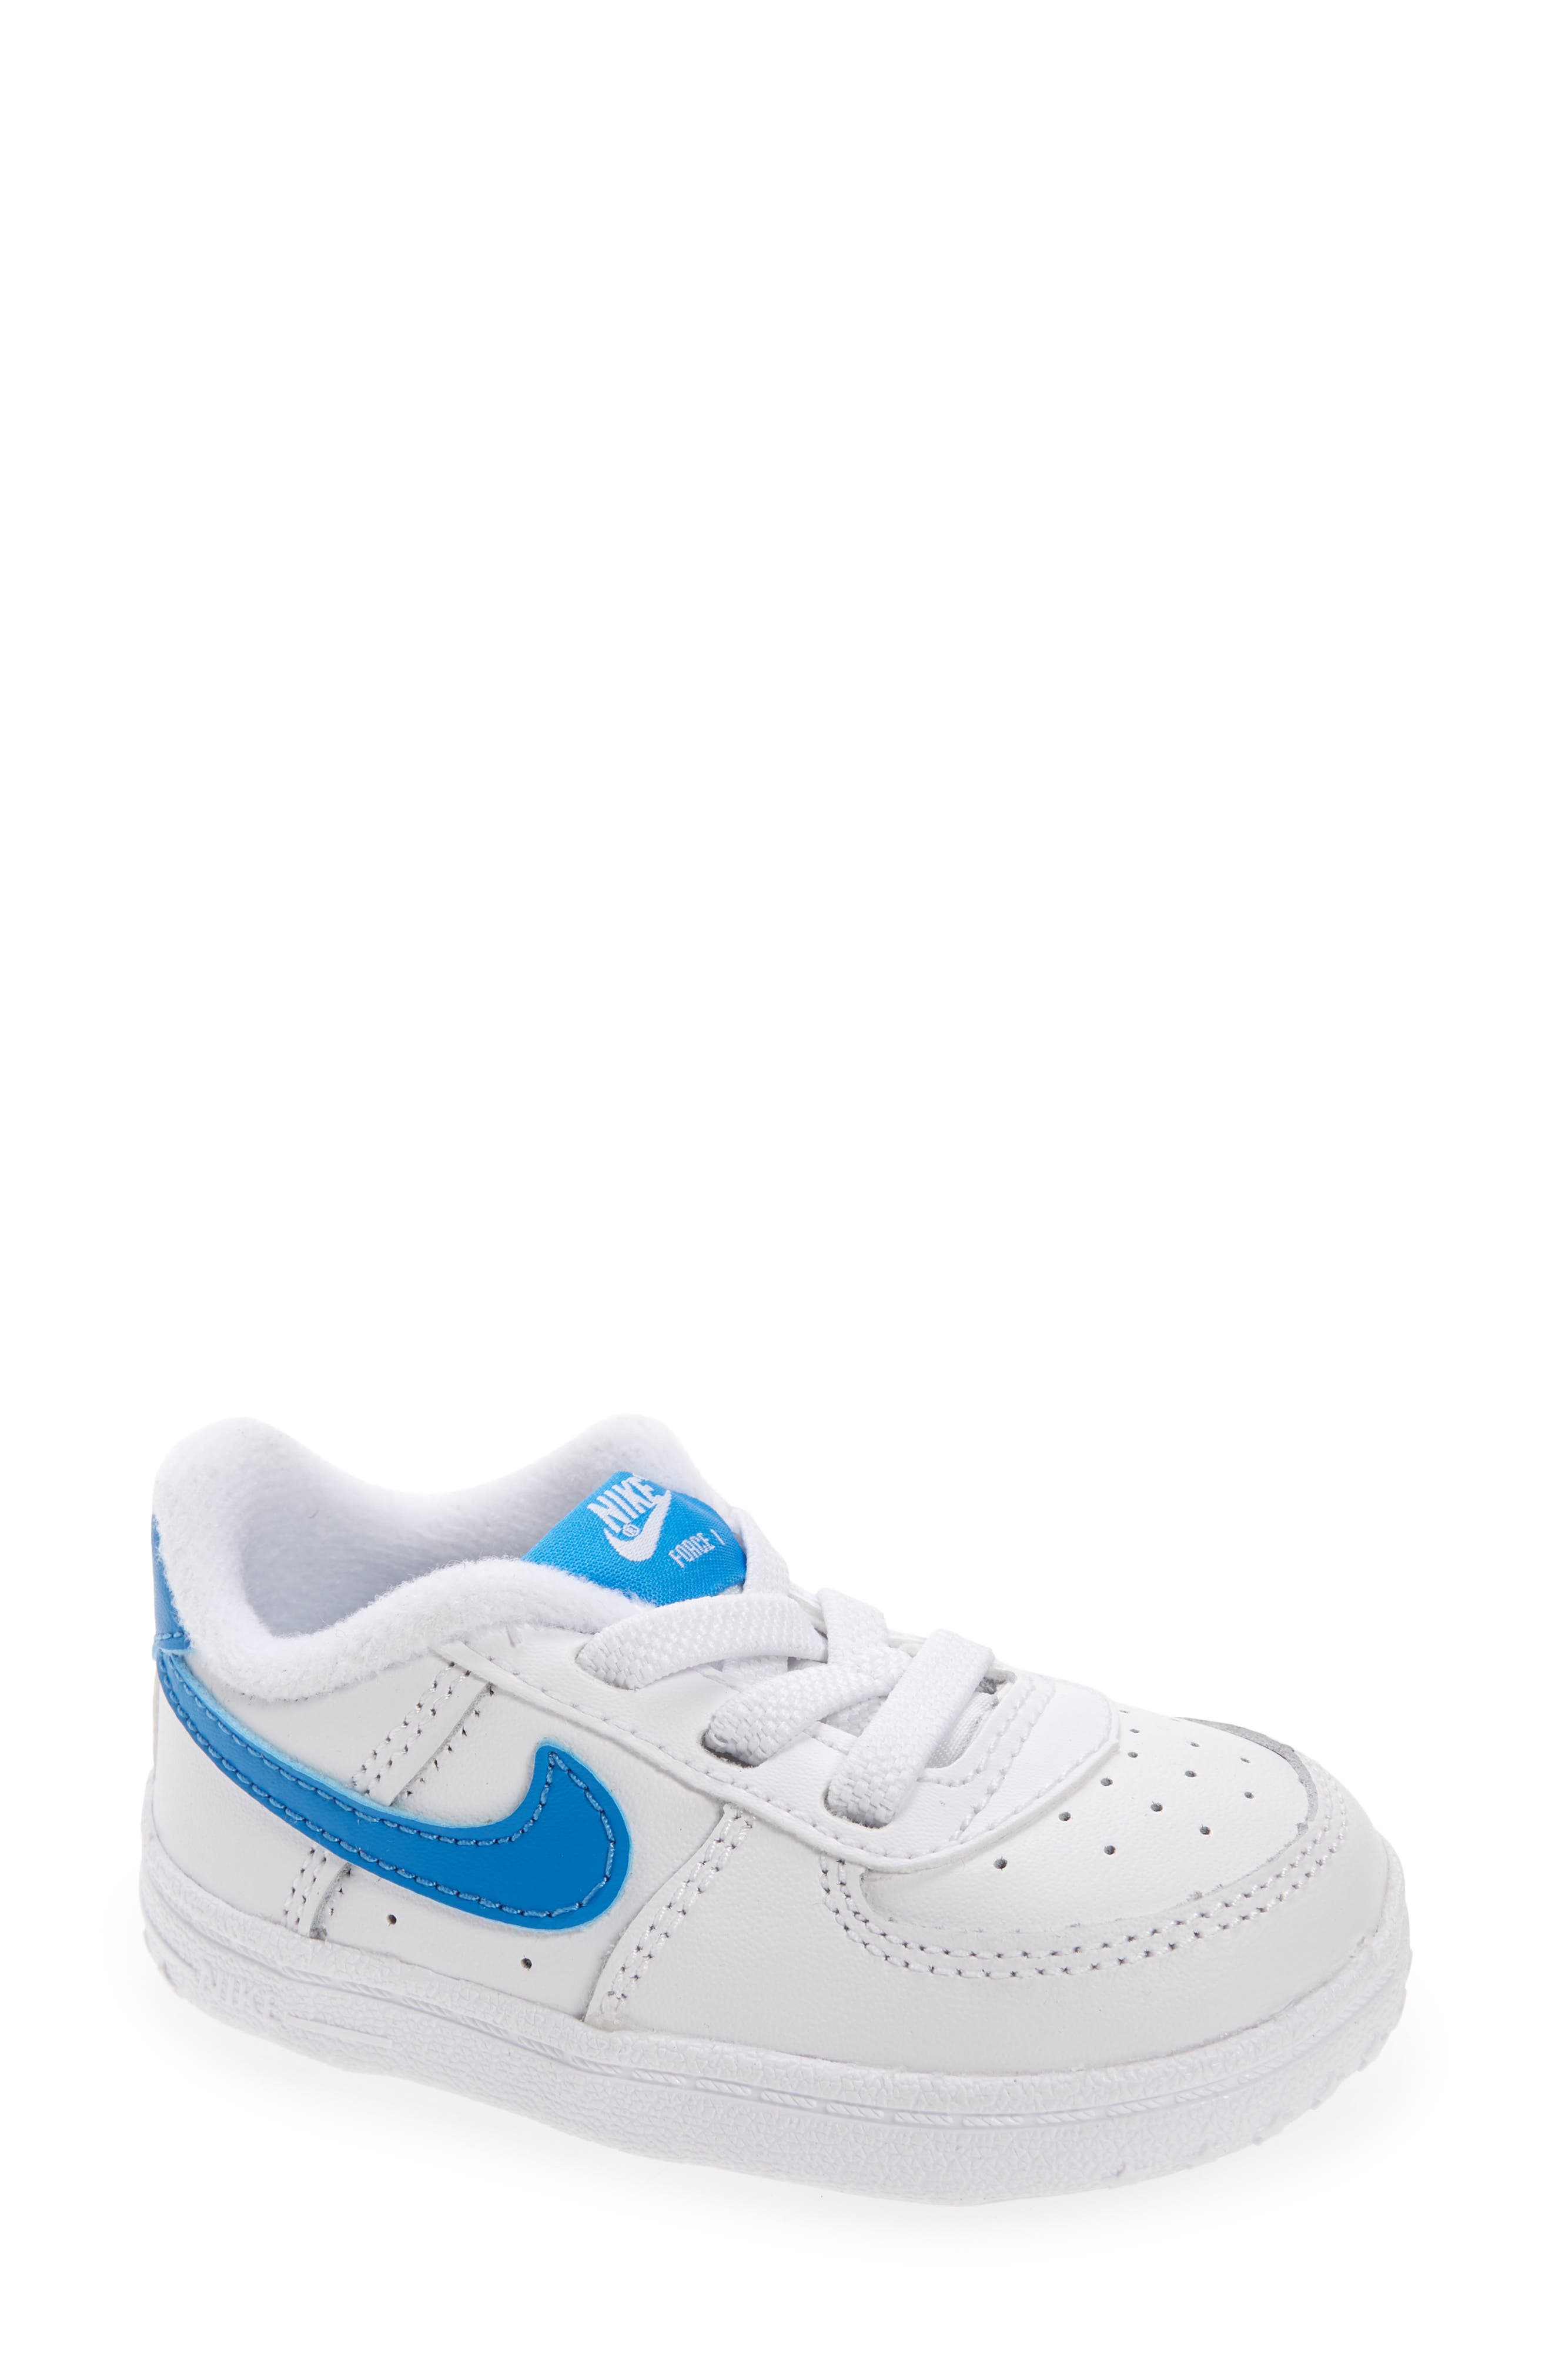 size 4 nike shoes baby